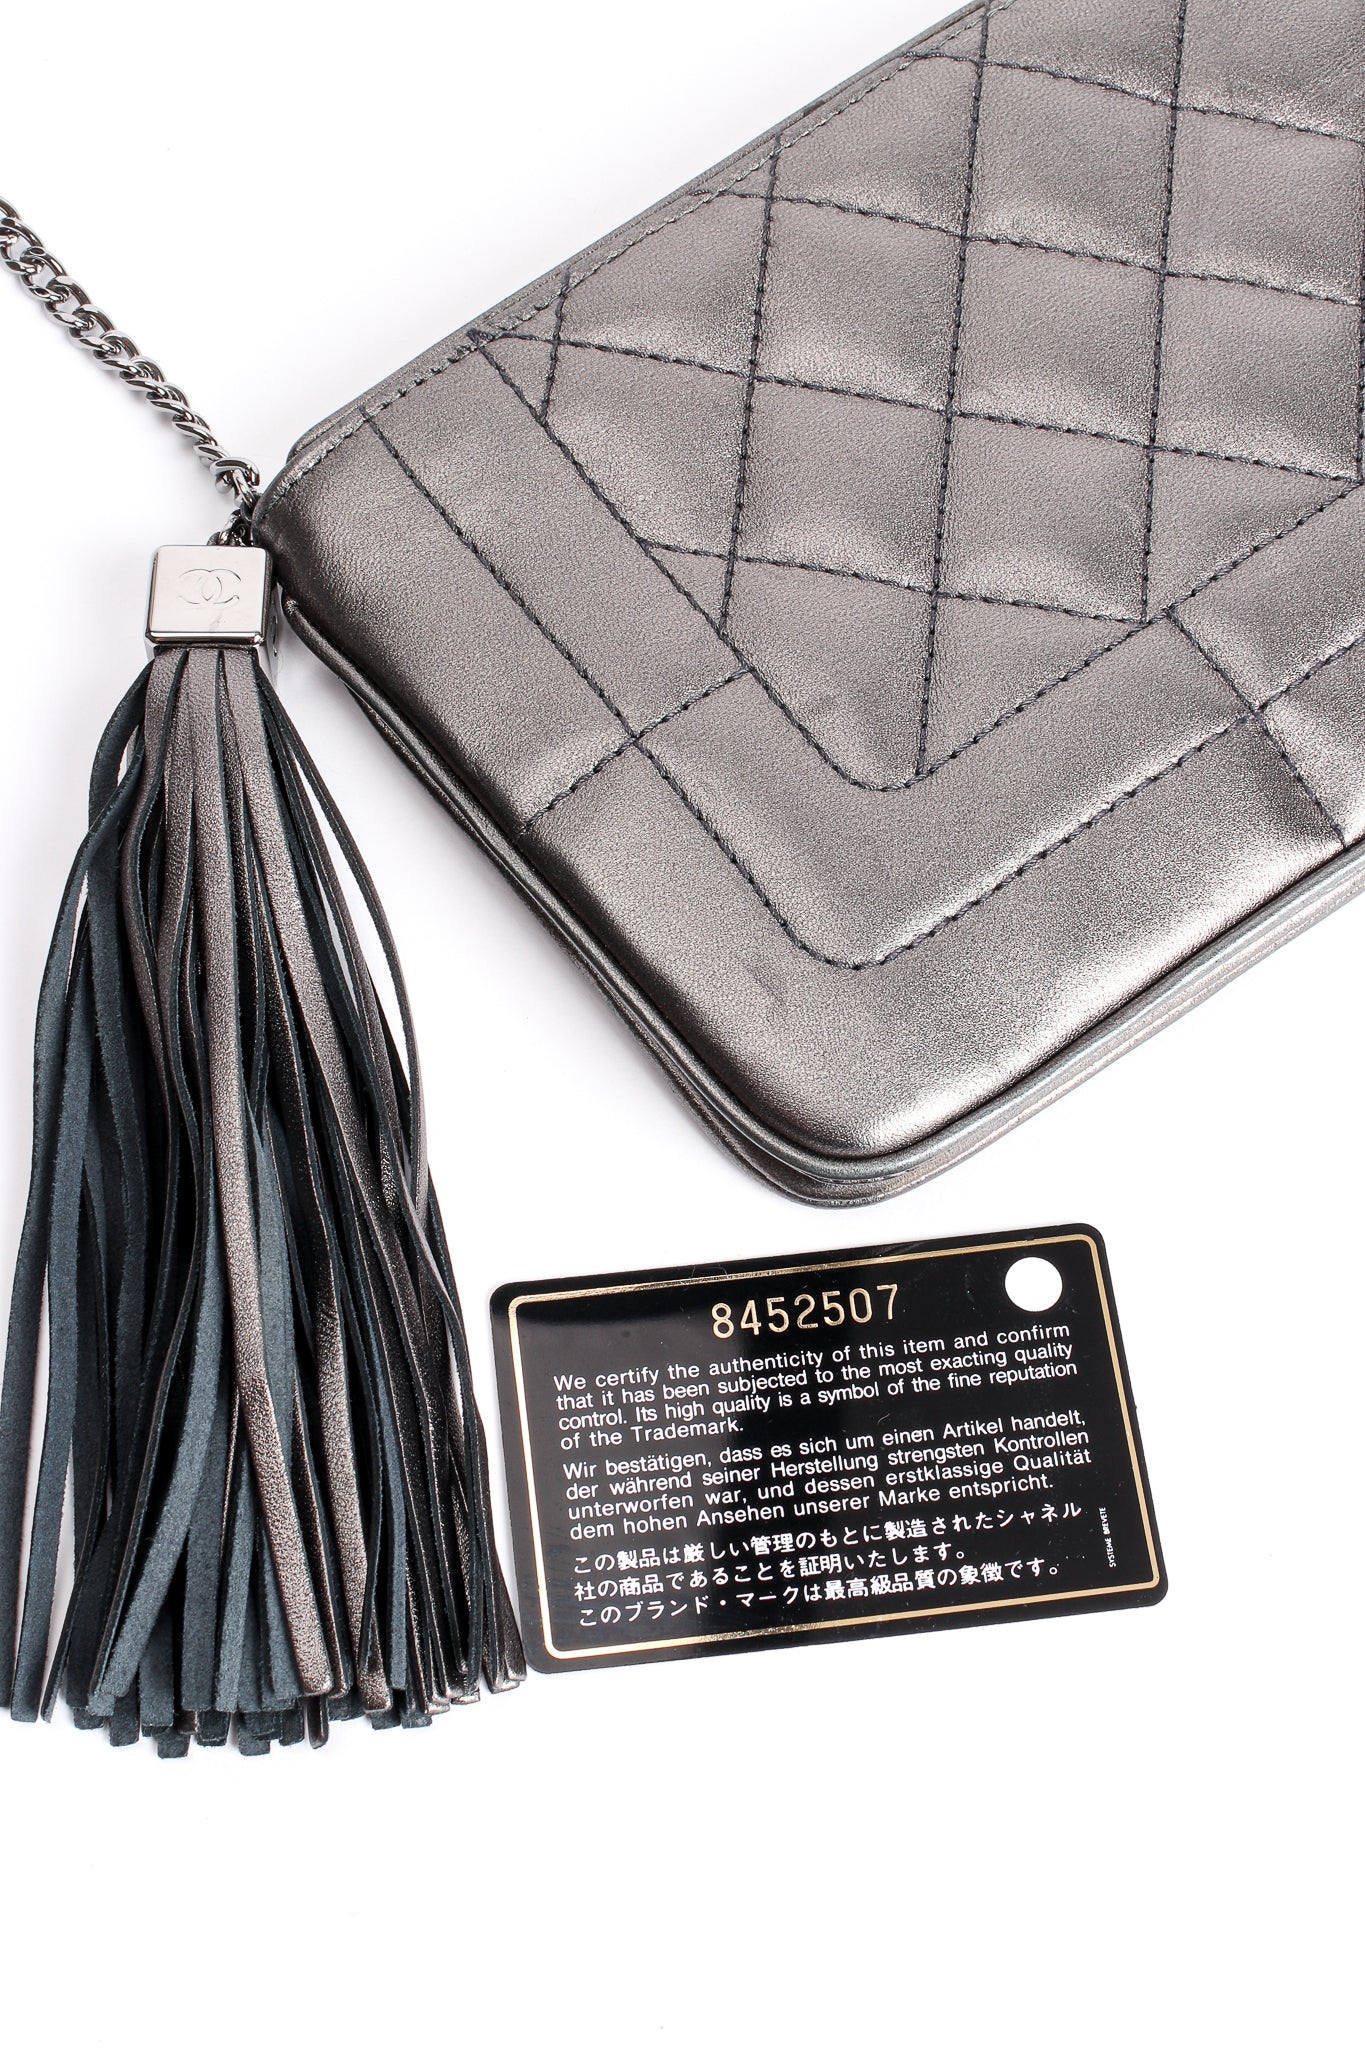 Vintage Chanel 2004 Metallic Quilted Tassel Shoulder Bag authentication card at Recess Los Angeles